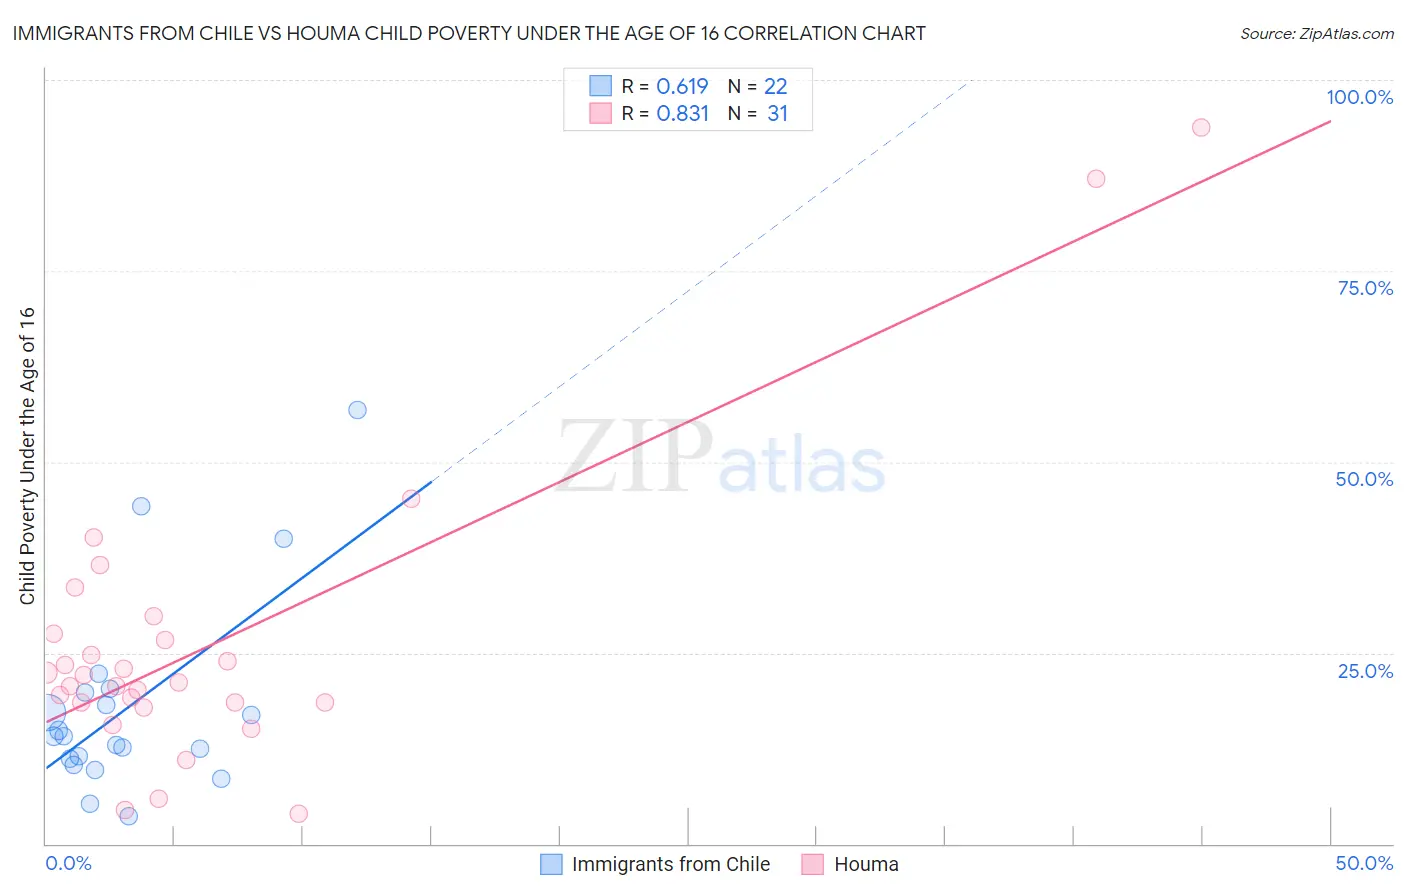 Immigrants from Chile vs Houma Child Poverty Under the Age of 16